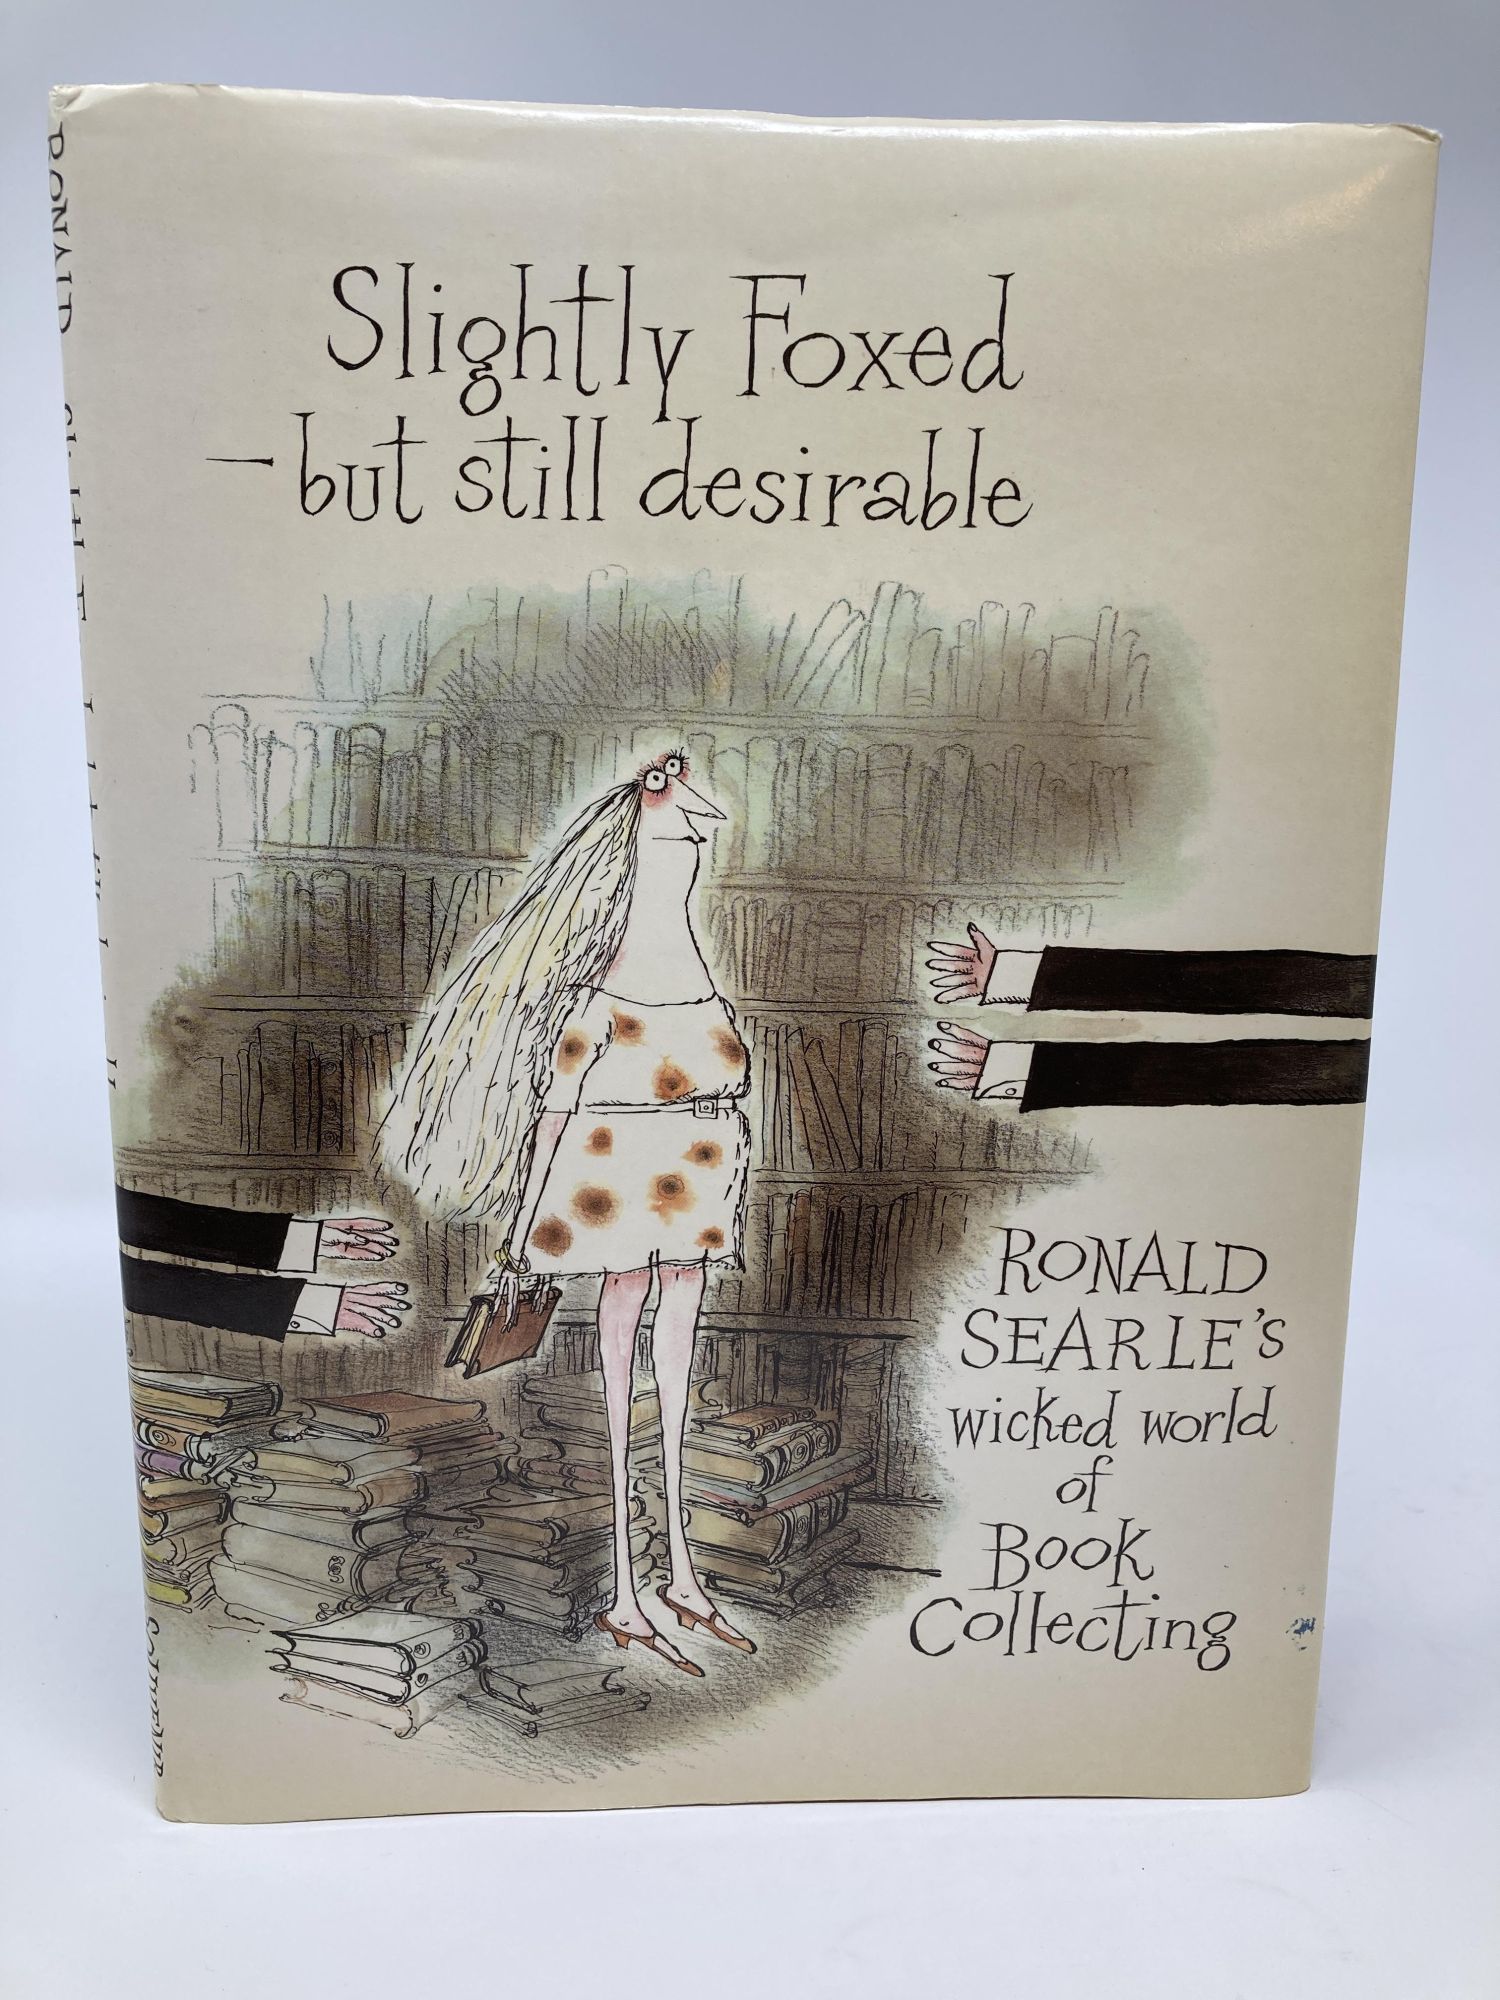 Searle, Ronald - Slightly Foxed - But Still Desirable, Ronald Searle's Wicked World of Book Collecting